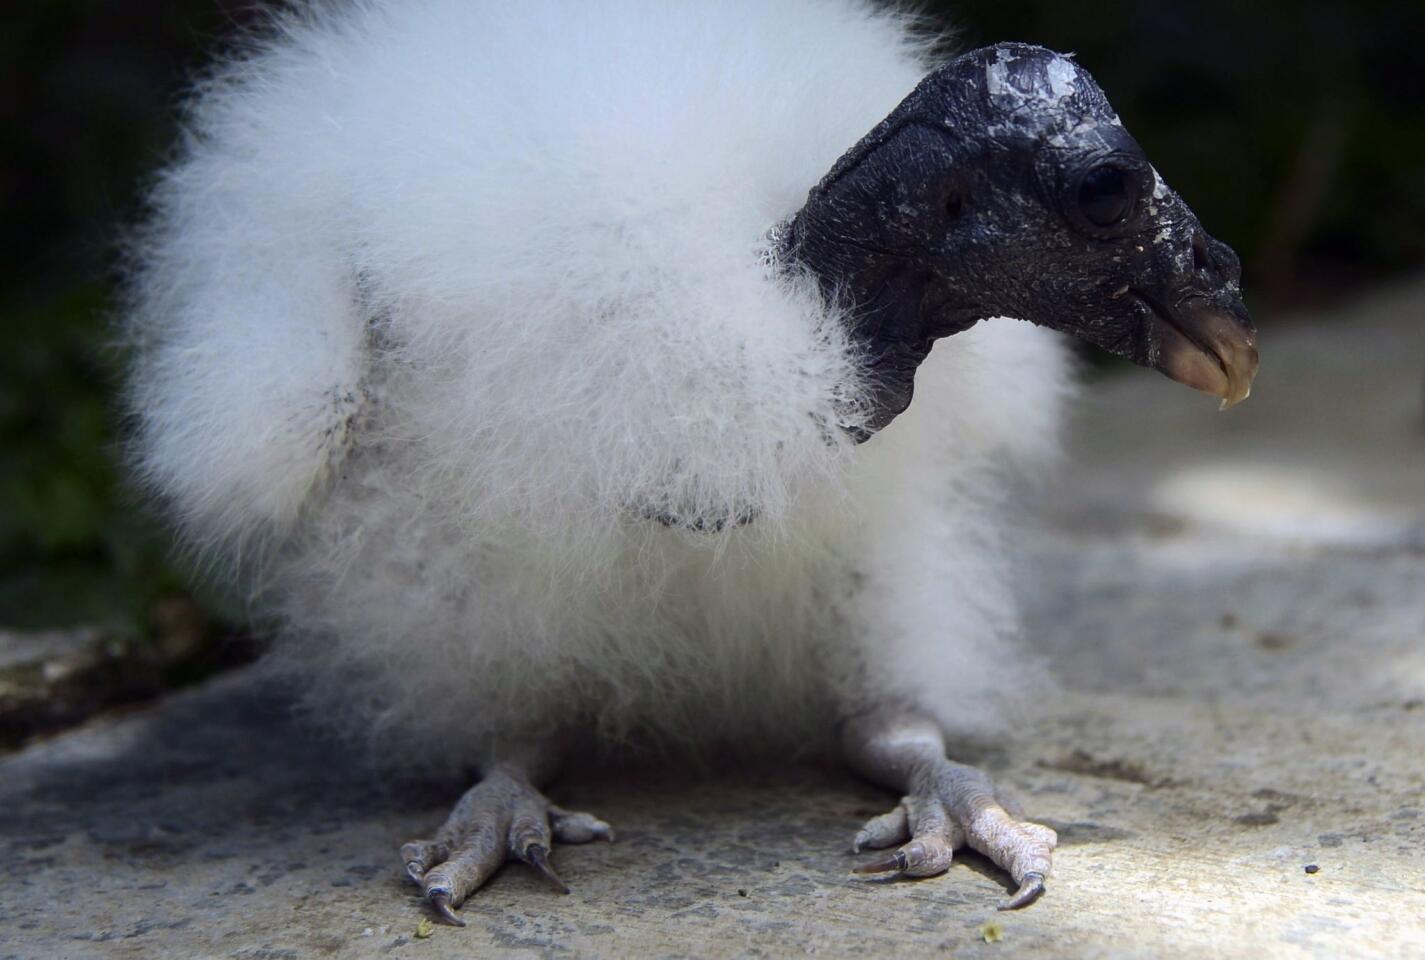 A King vulture chick -- born after its egg was artificially incubated for 58 days -- is seen at Santa Fe Zoo in Medellin, Colombia, on June 17, 2016.